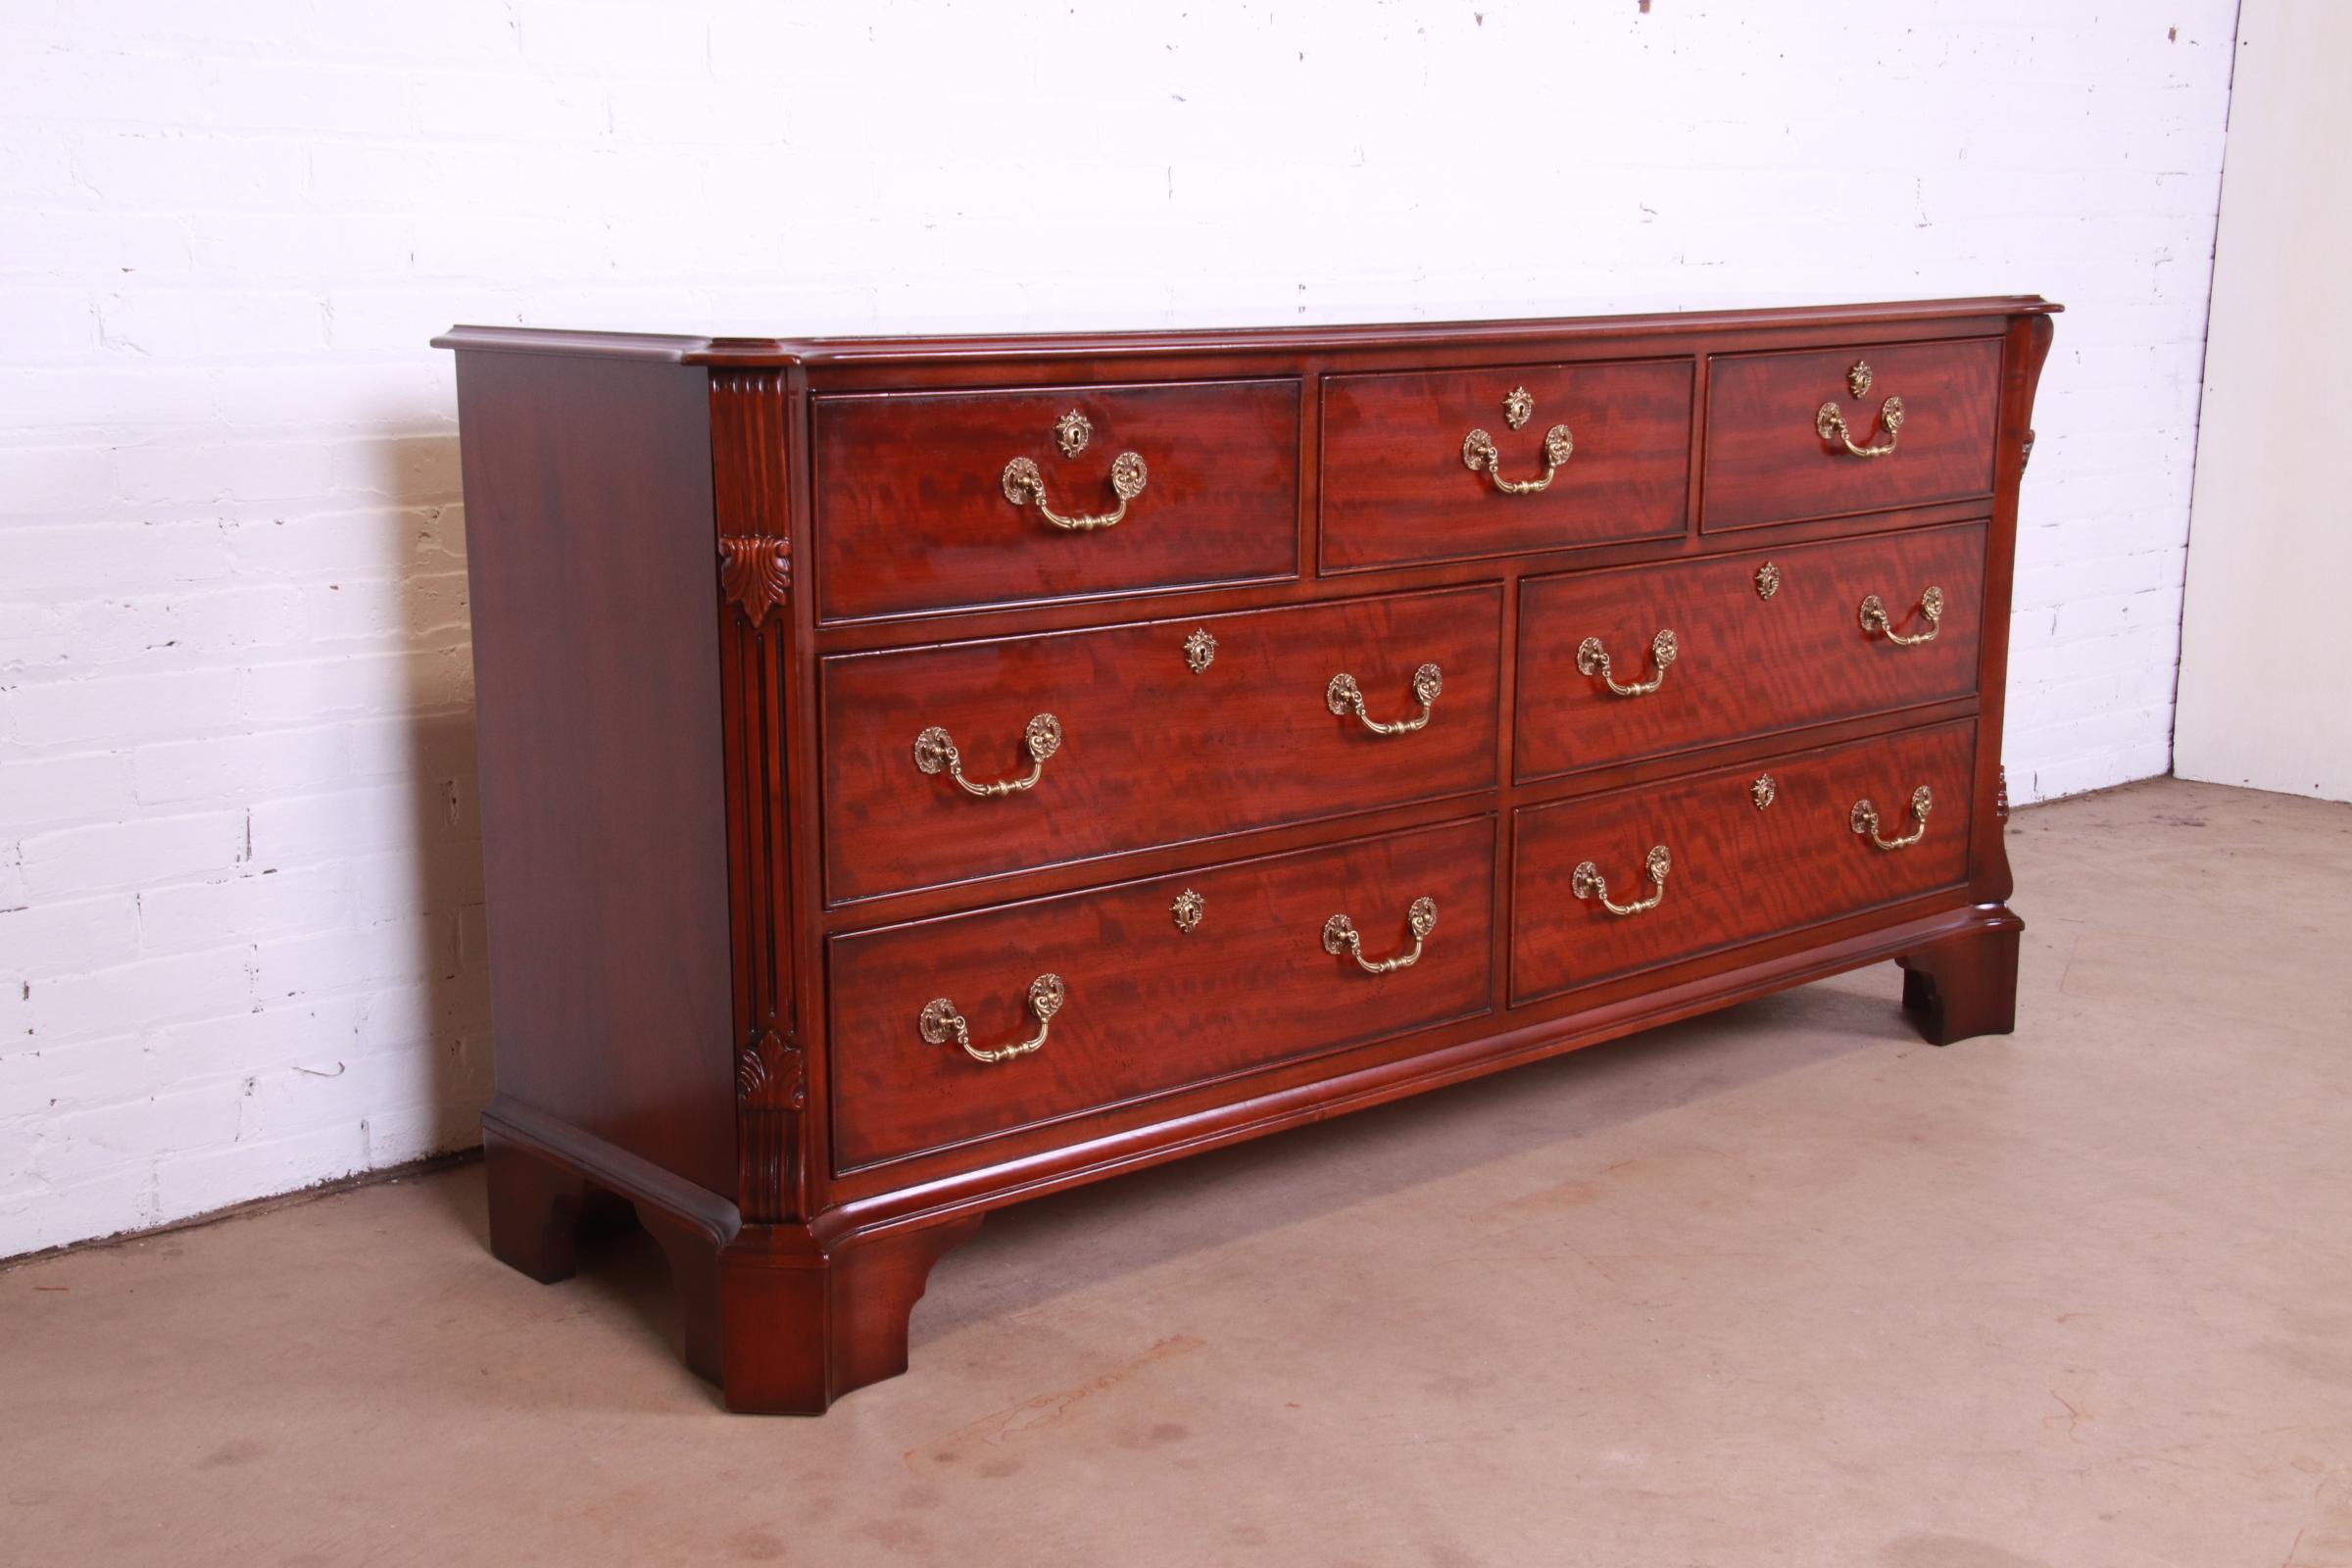 Henredon Georgian Carved Mahogany Dresser or Credenza In Good Condition For Sale In South Bend, IN